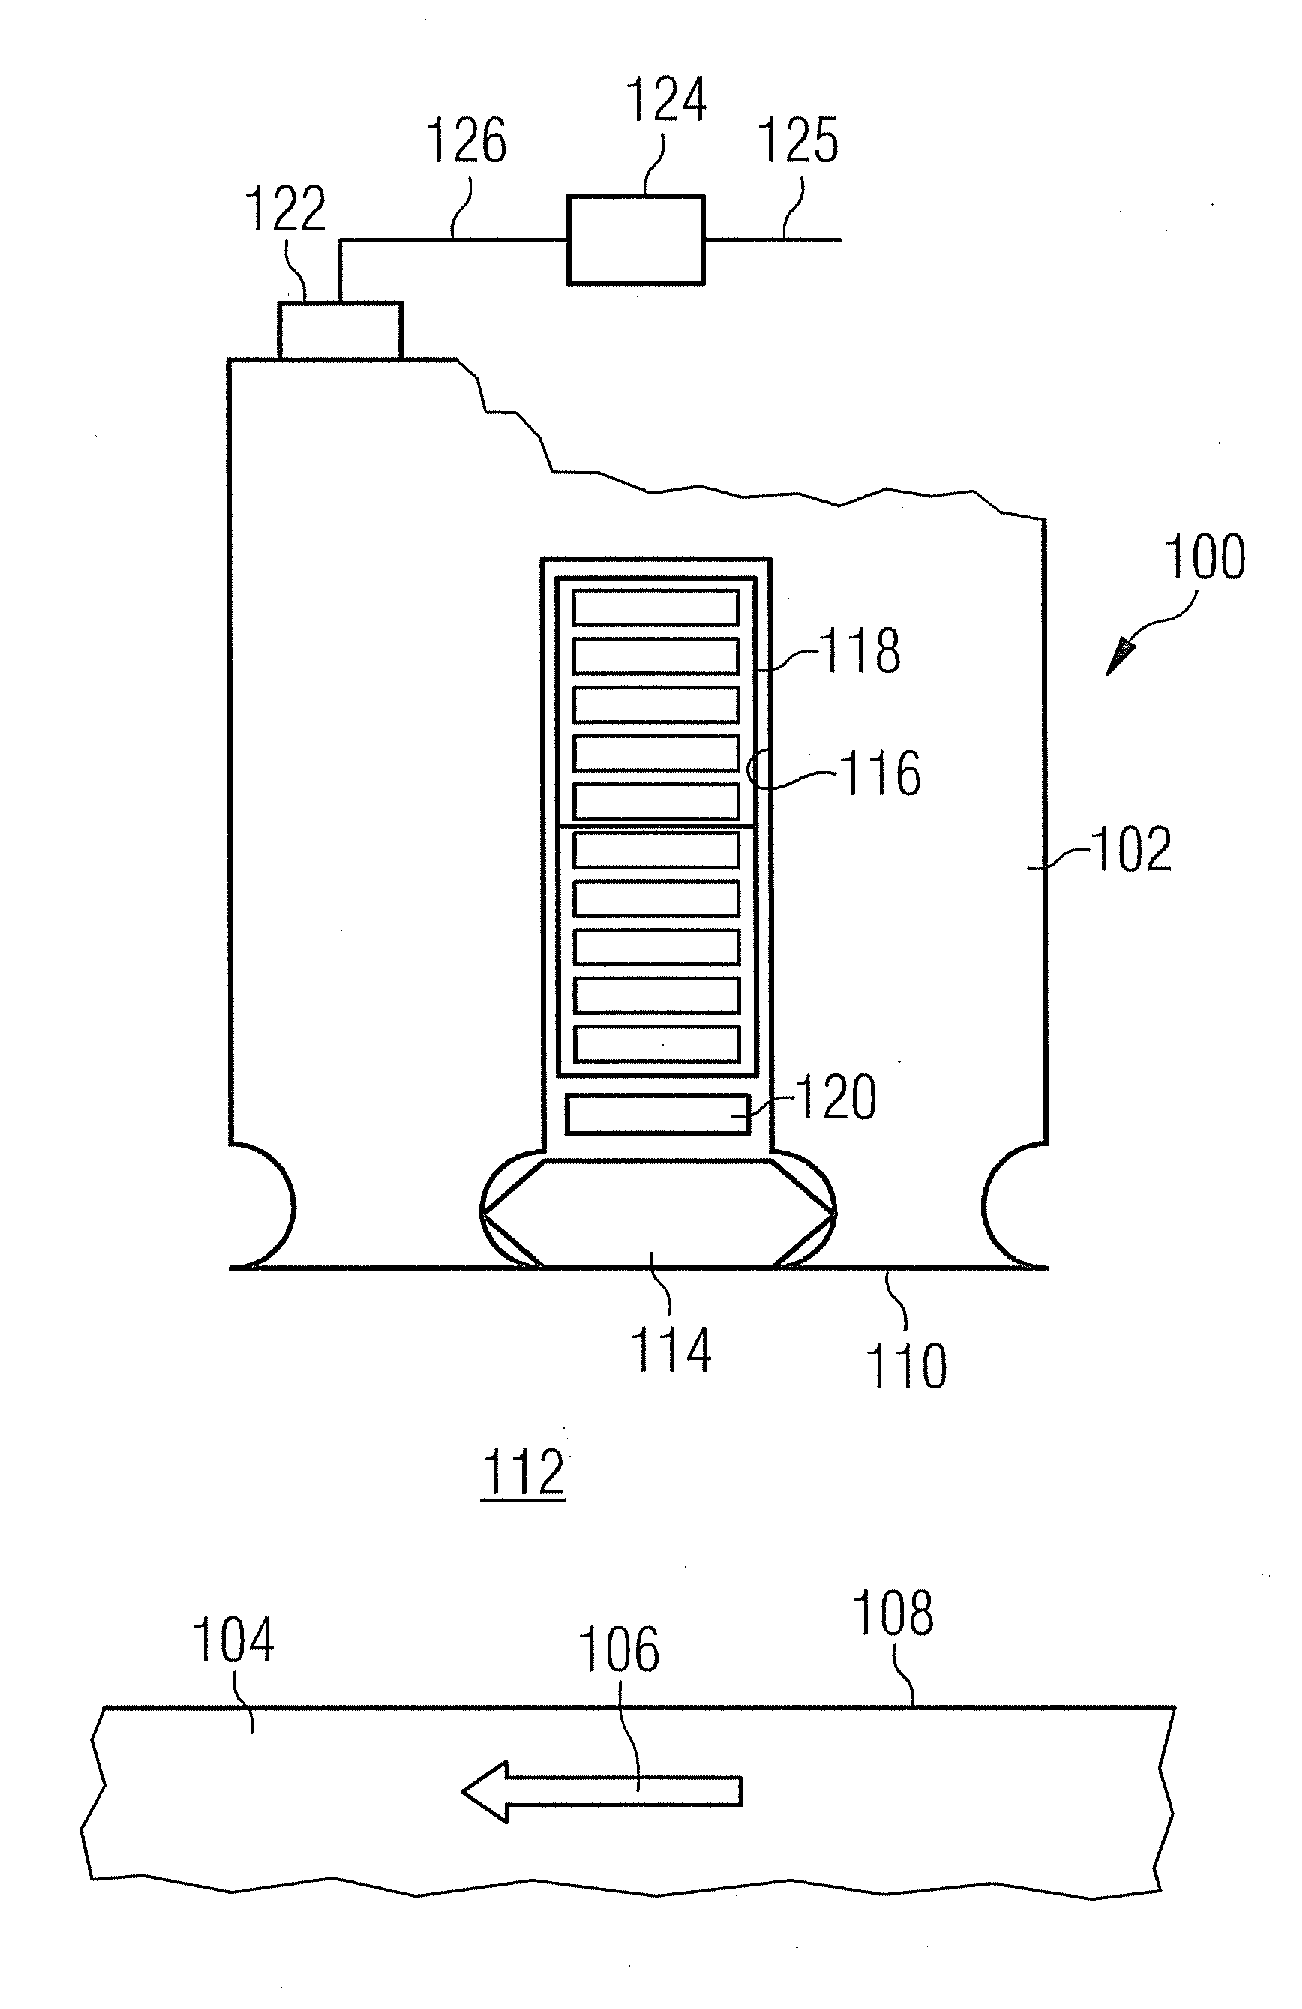 Vibration Monitoring of a Magnetic Element in an Electrical Machine